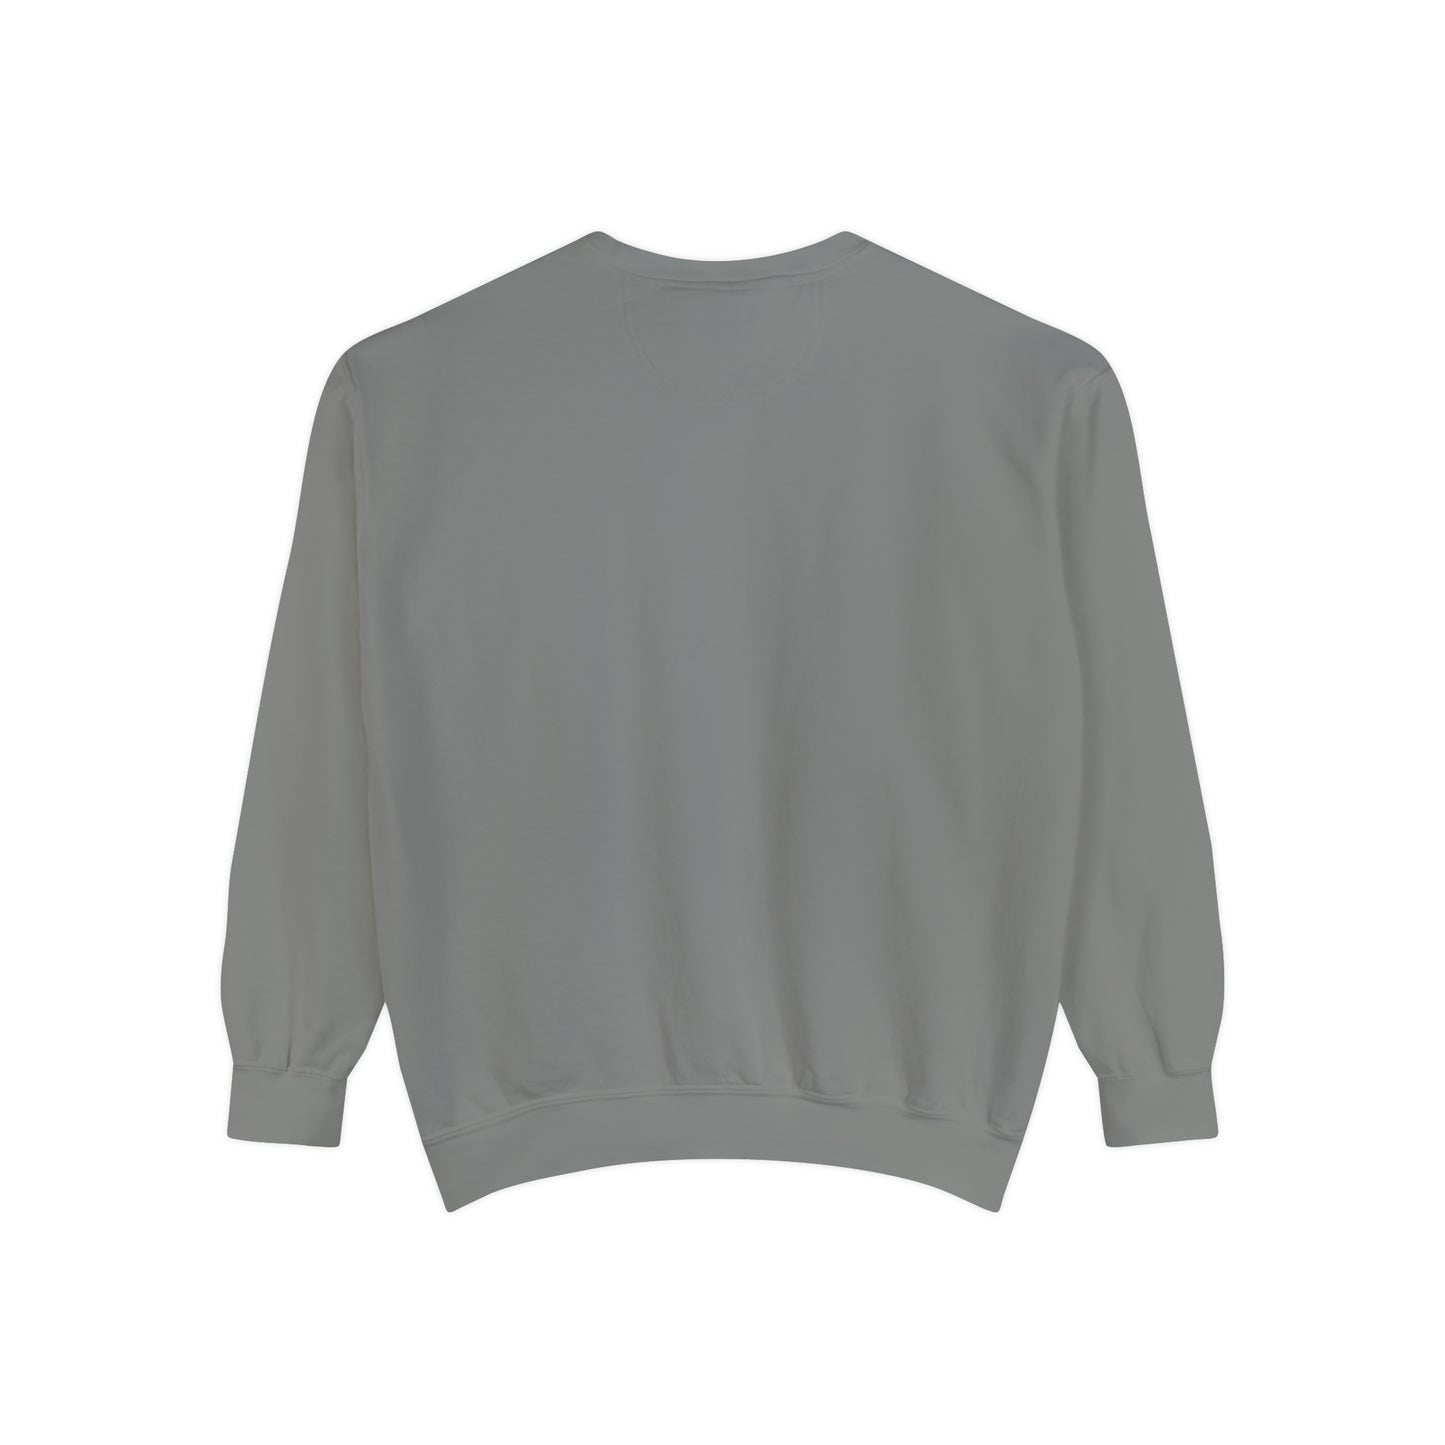 Less is More Garment-Dyed Sweatshirt